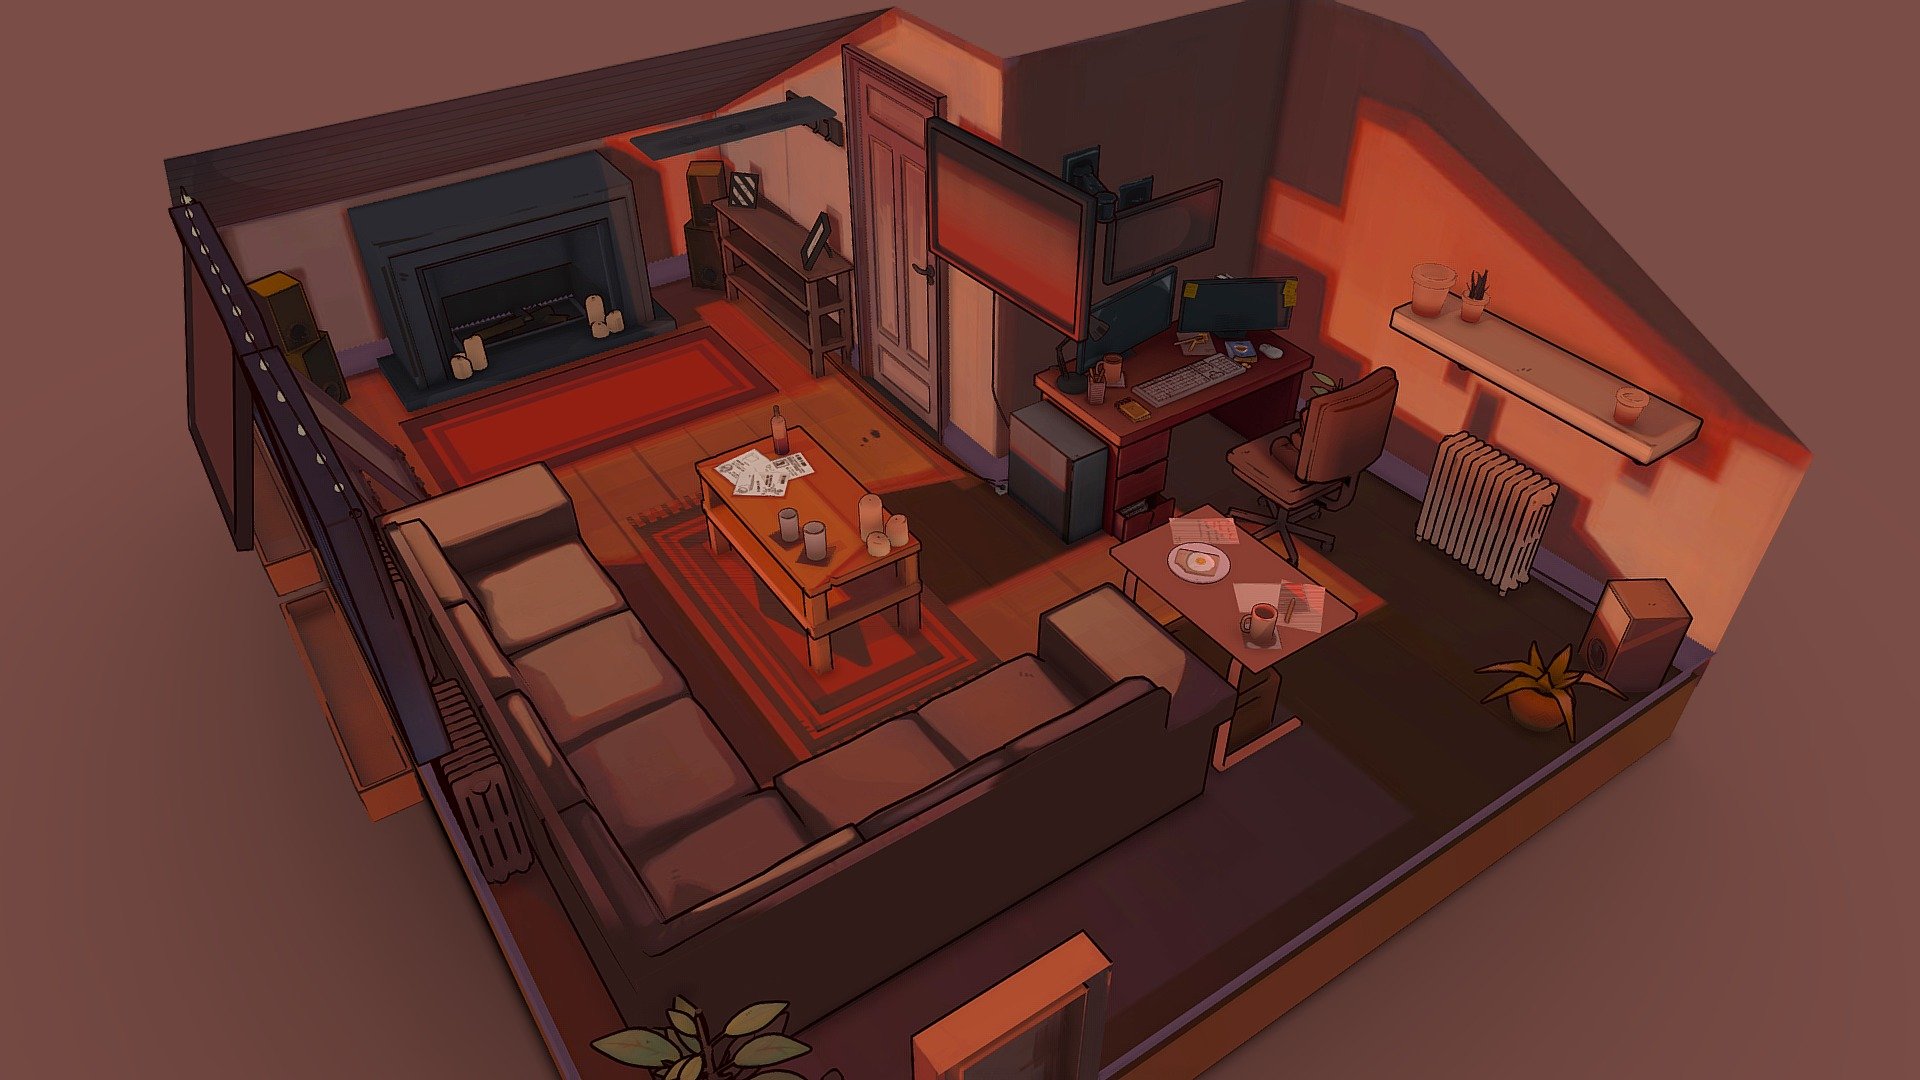 This is part of an environment for VRChat, it’s currently in the process of being uploaded and it has a few rooms. This it the loft/livingroom. :)

Once it’s uploaded in VRChat though I’ll give a link if you want to check it up :)

The client wanted me to do model and texture their apartment and let me have fun with it. So I went for a stylised approach. I really wanted it to look like an illustration from any angle which really just allows me to merge both my 2D illustrative skills and 3D skills which brings me so much joy! 

I really hope you like it, and if you’re interested in a commission yourself, please get in touch :3

Created using Blender, Substance Designad and painter.

Featured here: https://www.blendernation.com/2023/03/20/the-best-blender-art-on-sketchfab-2023-week-12/

Thank yoooou - Loft - 3D model by ilyaev (Jane) (@ilyaev) 3d model